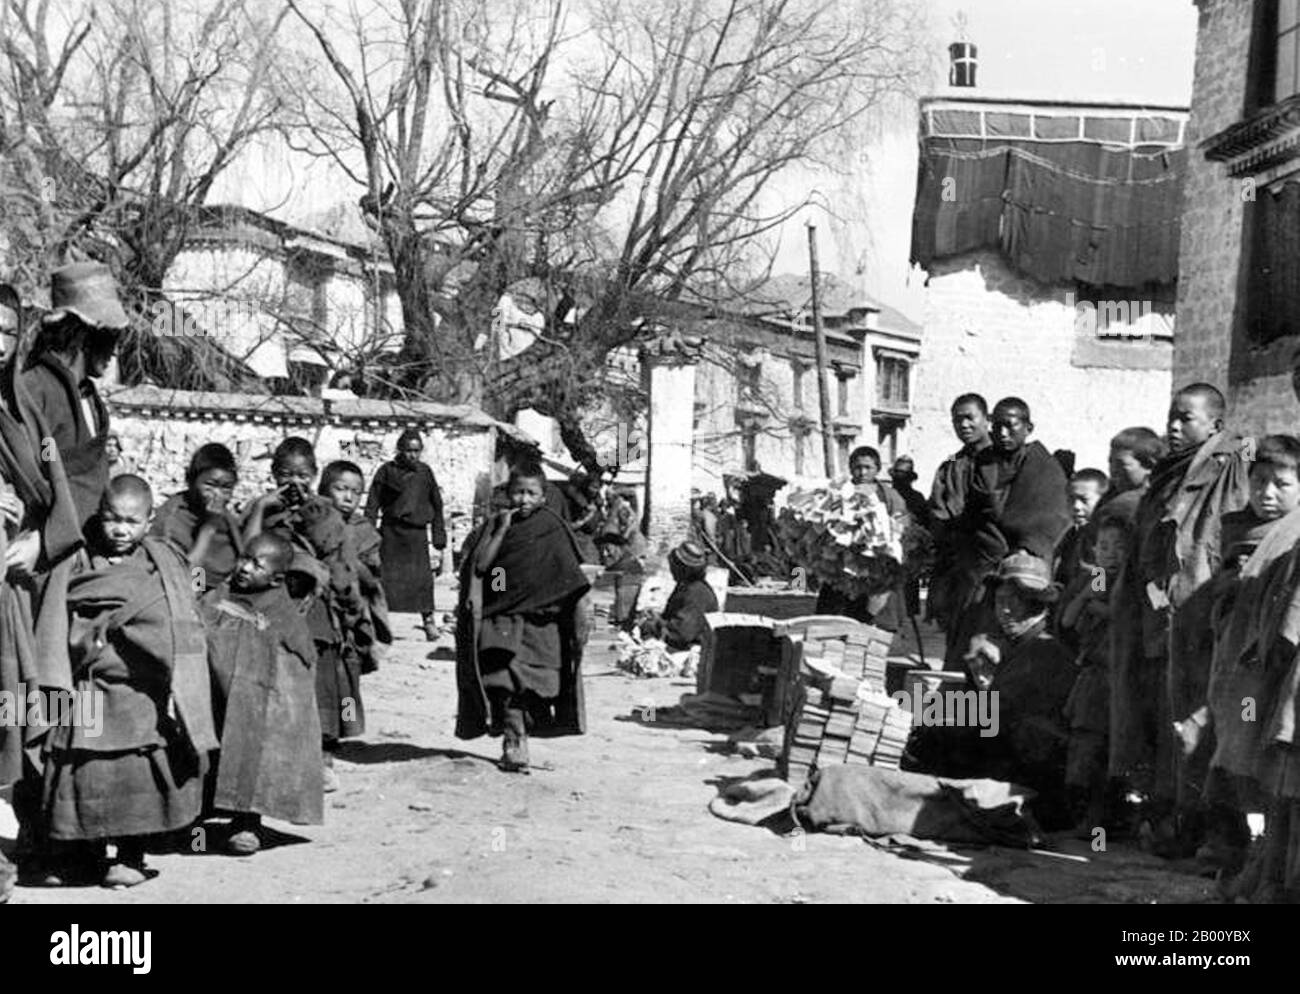 China/Tibet: A street scene in Lhasa, c. 1932. Photo by Ernst Schafer (1910-1992)/Bundesarchiv, Bild 135-S-10-15-27 (CC BY-SA 3.0 License).  Tibetan Buddhist monks and novices photographed by the German Tibet Expedition c. 1932. Stock Photo